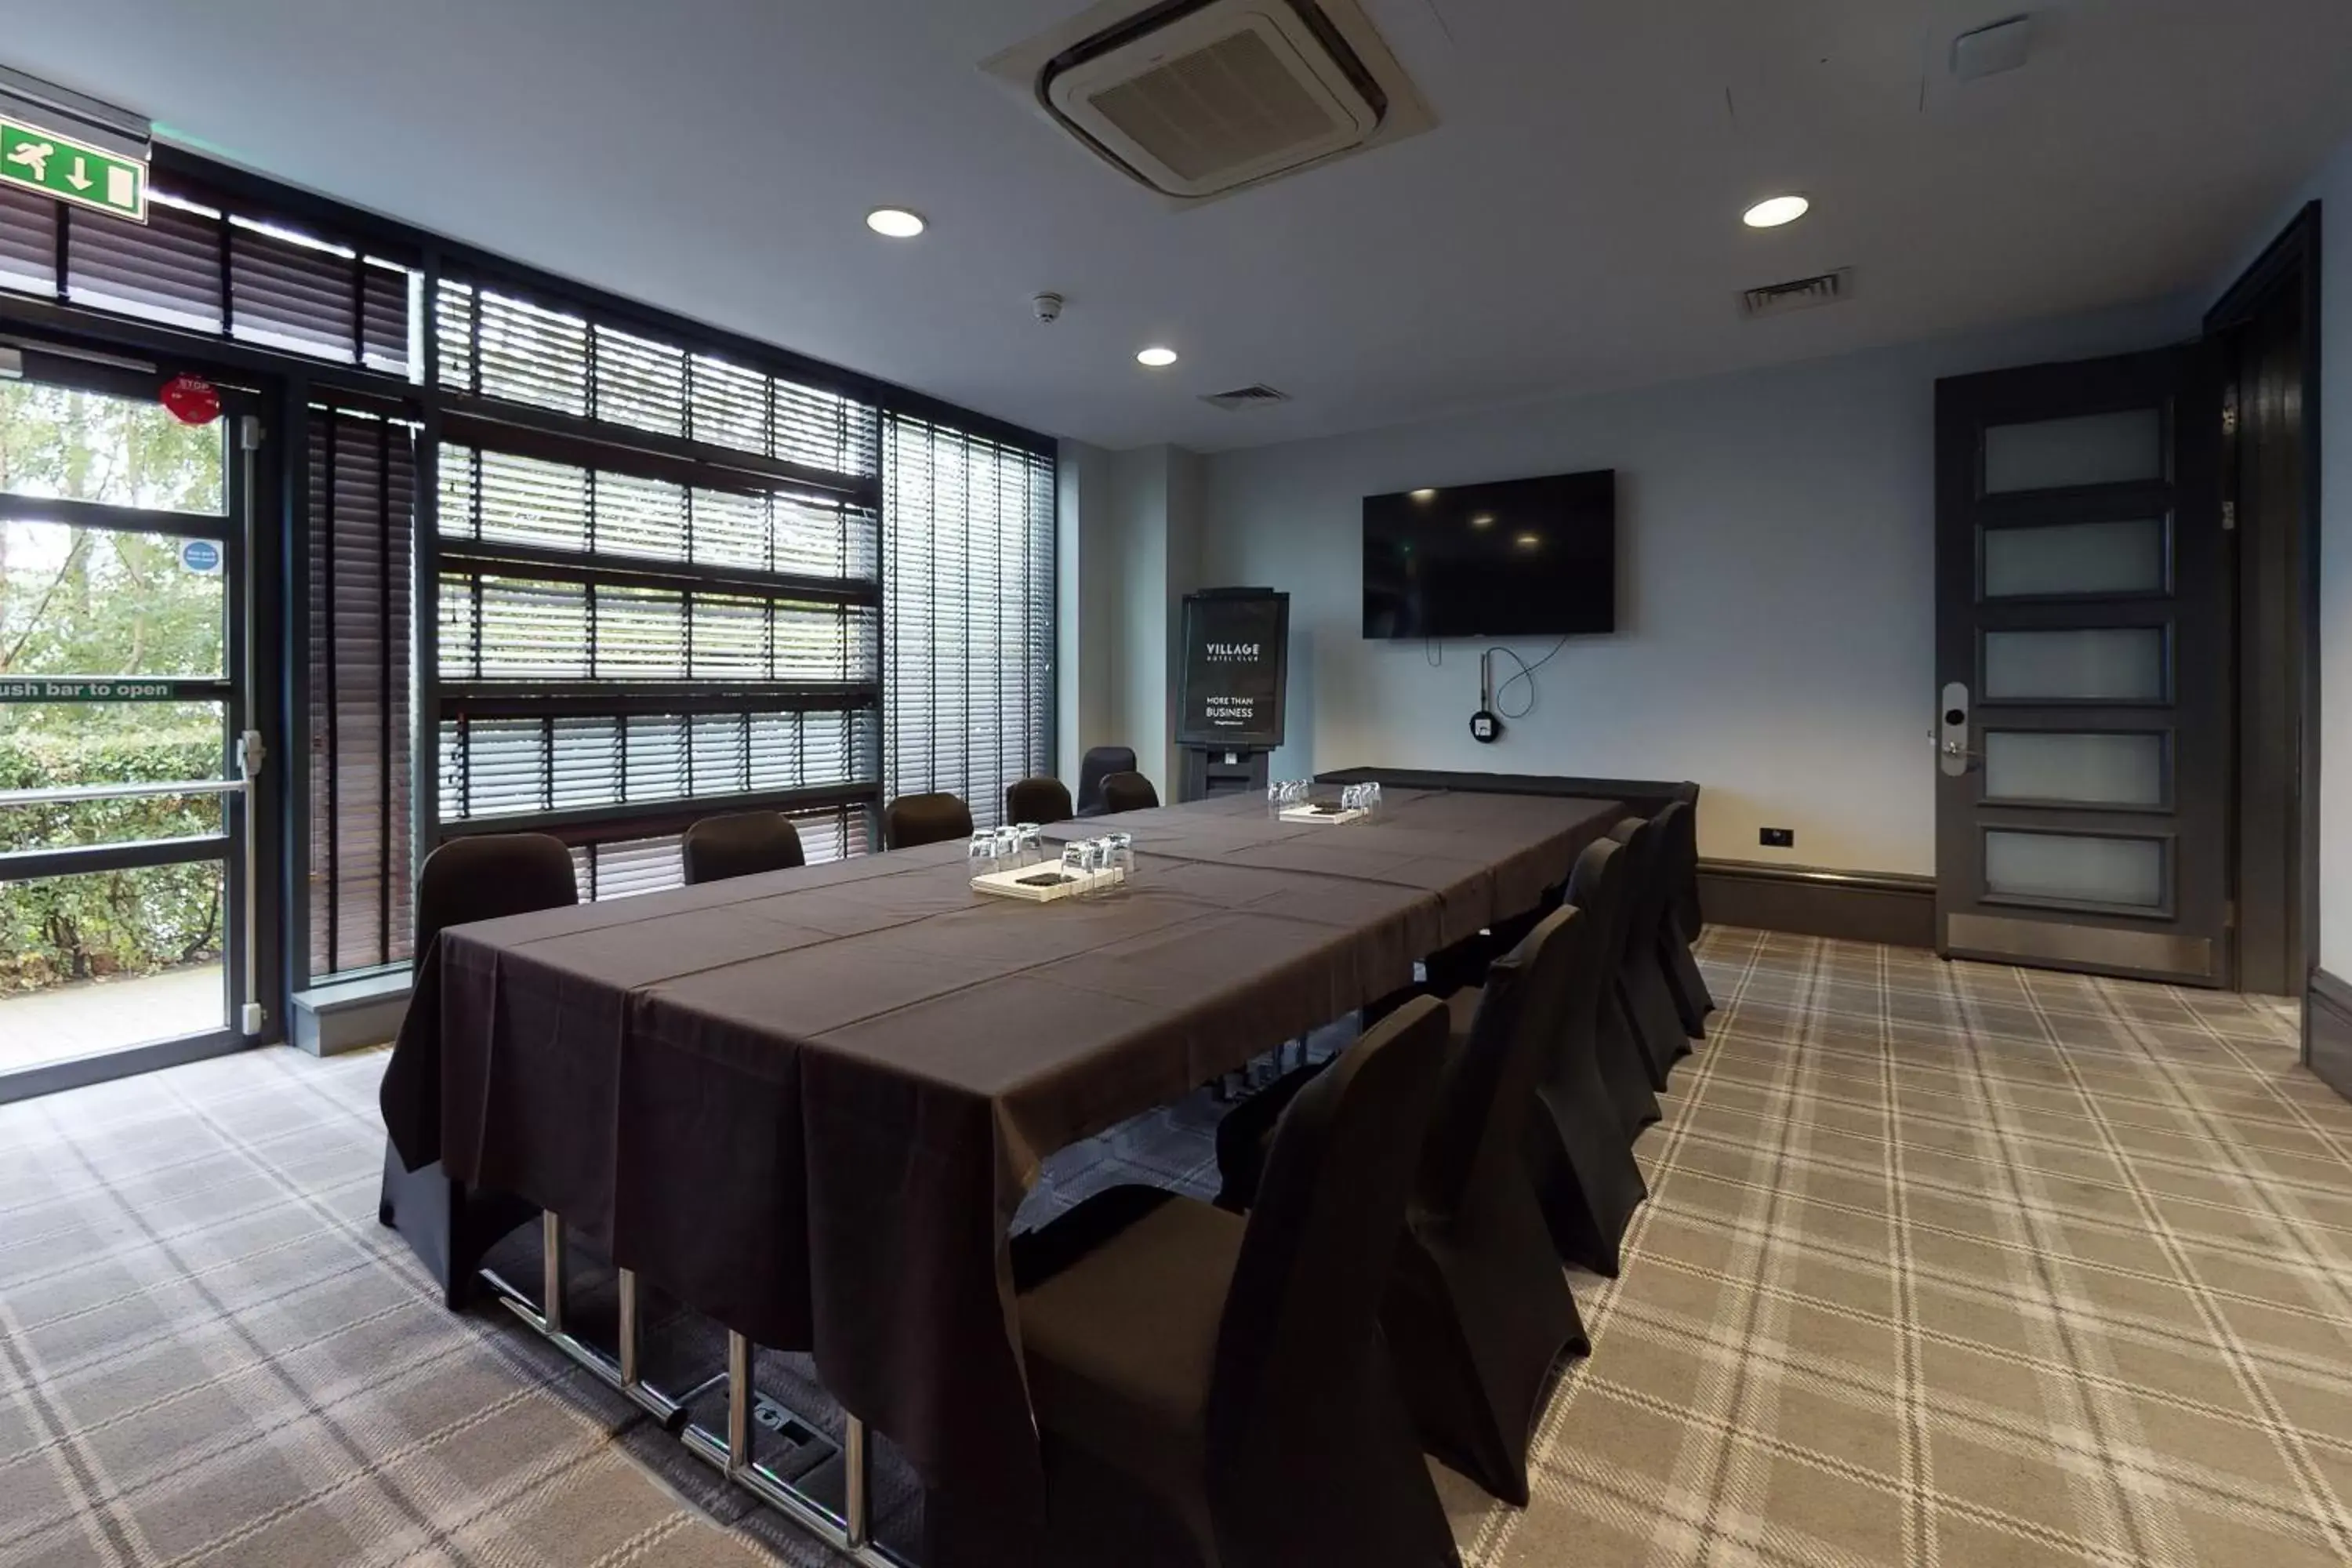 Meeting/conference room in Village Hotel Leeds South